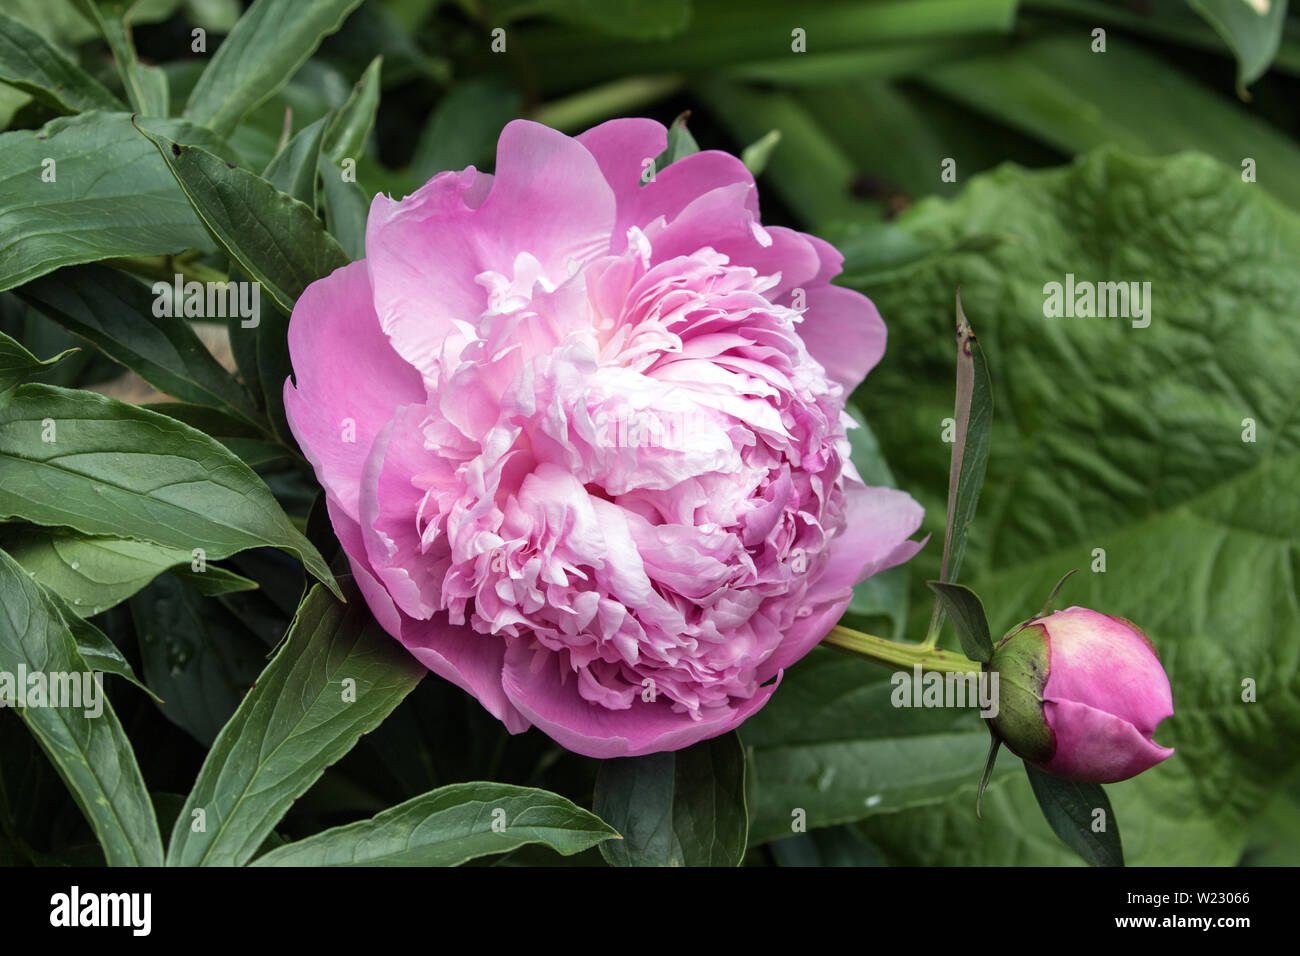 Closeup details of a single pink Peony flower in full bloom  and a bud. The background is leafy green. Stock Photo